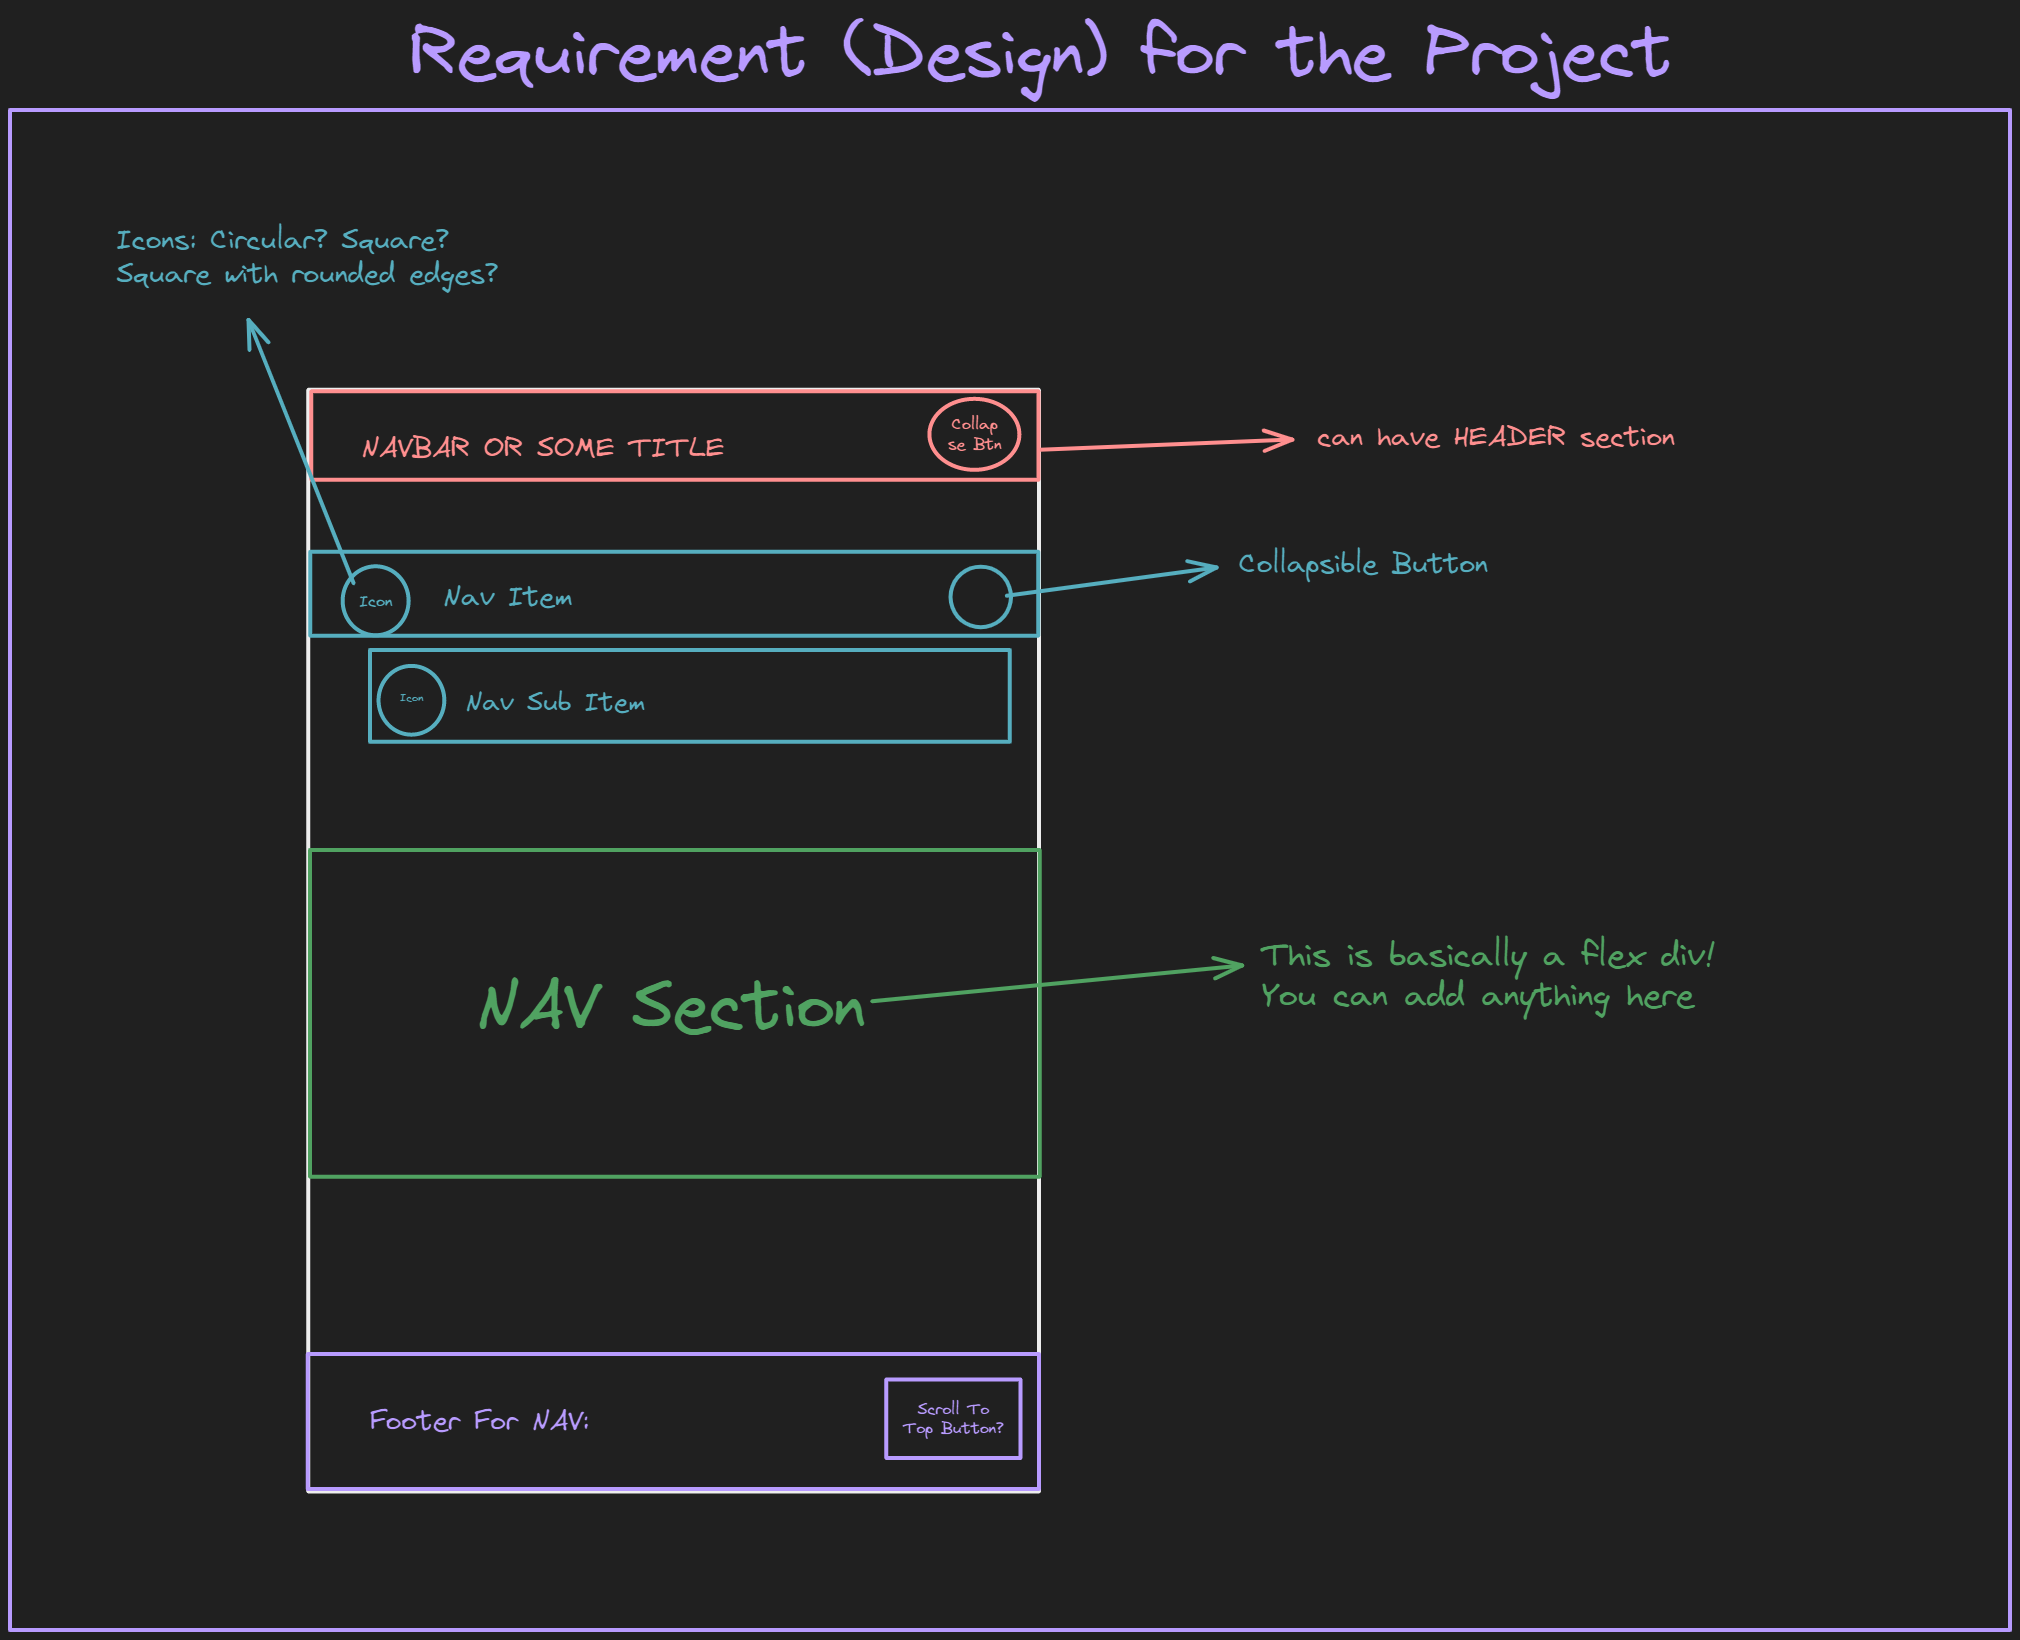 Initial Diagram for Project